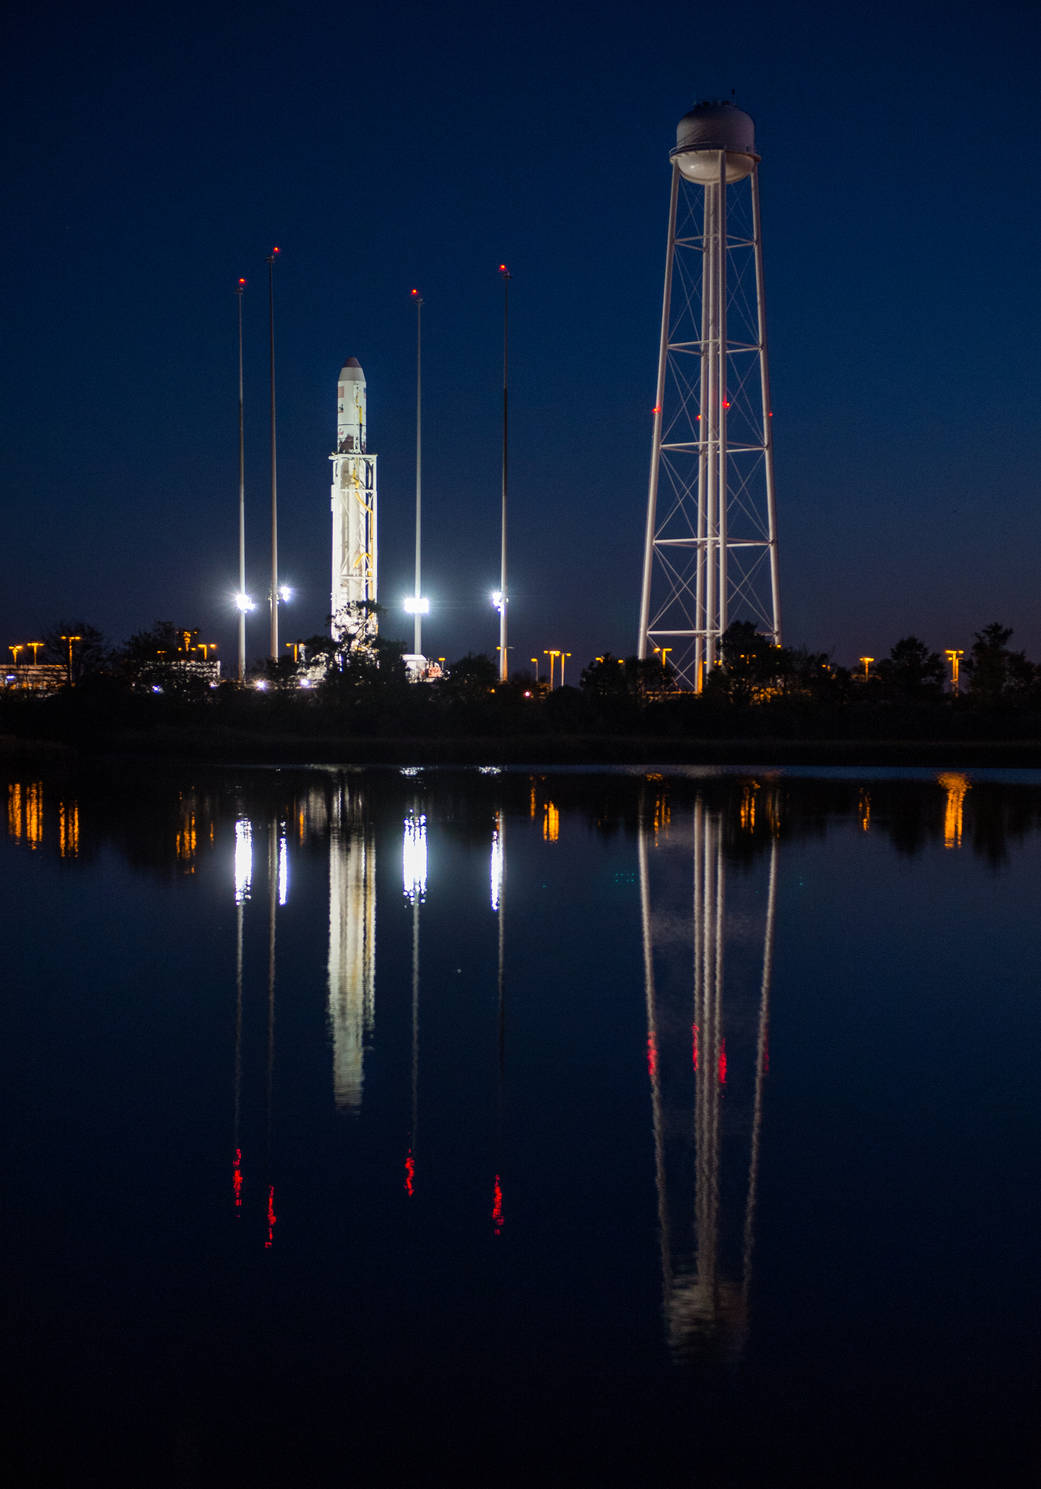 The Orbital Sciences Corporation Antares rocket, with the Cygnus spacecraft at launch pad, NASA Wallops